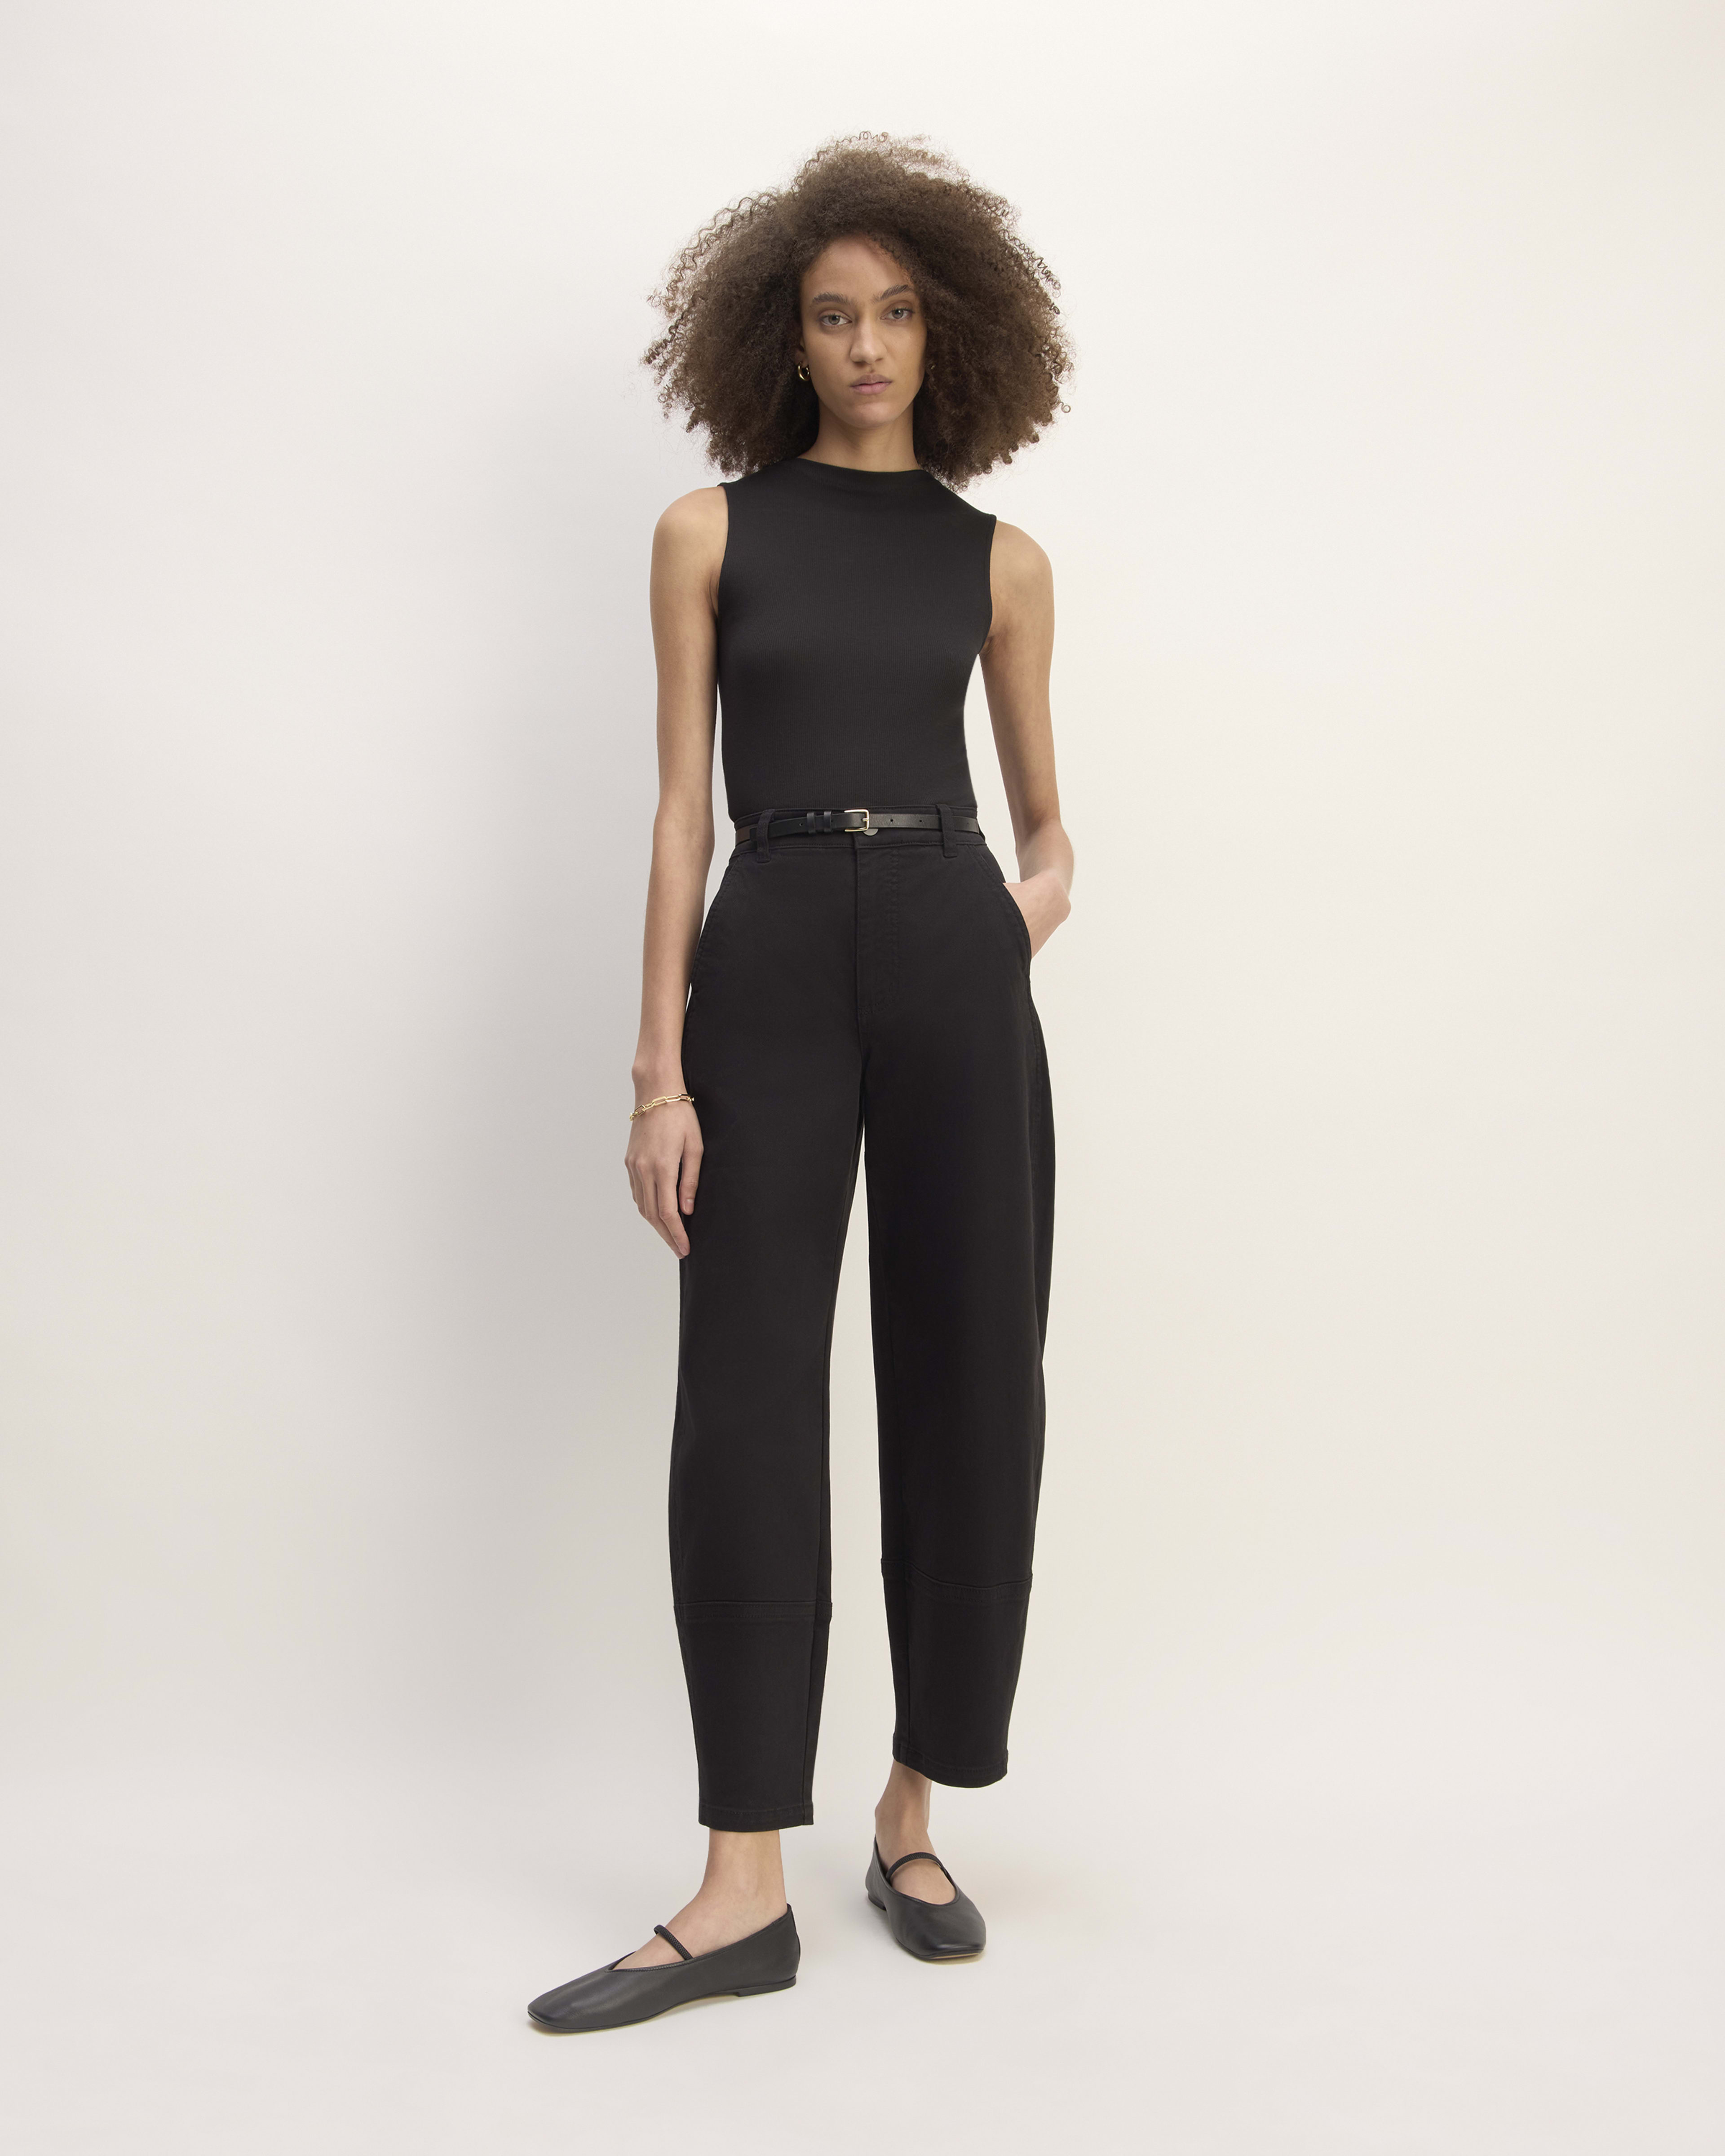 Everlane Review: The Slim Leg Crop — Fairly Curated